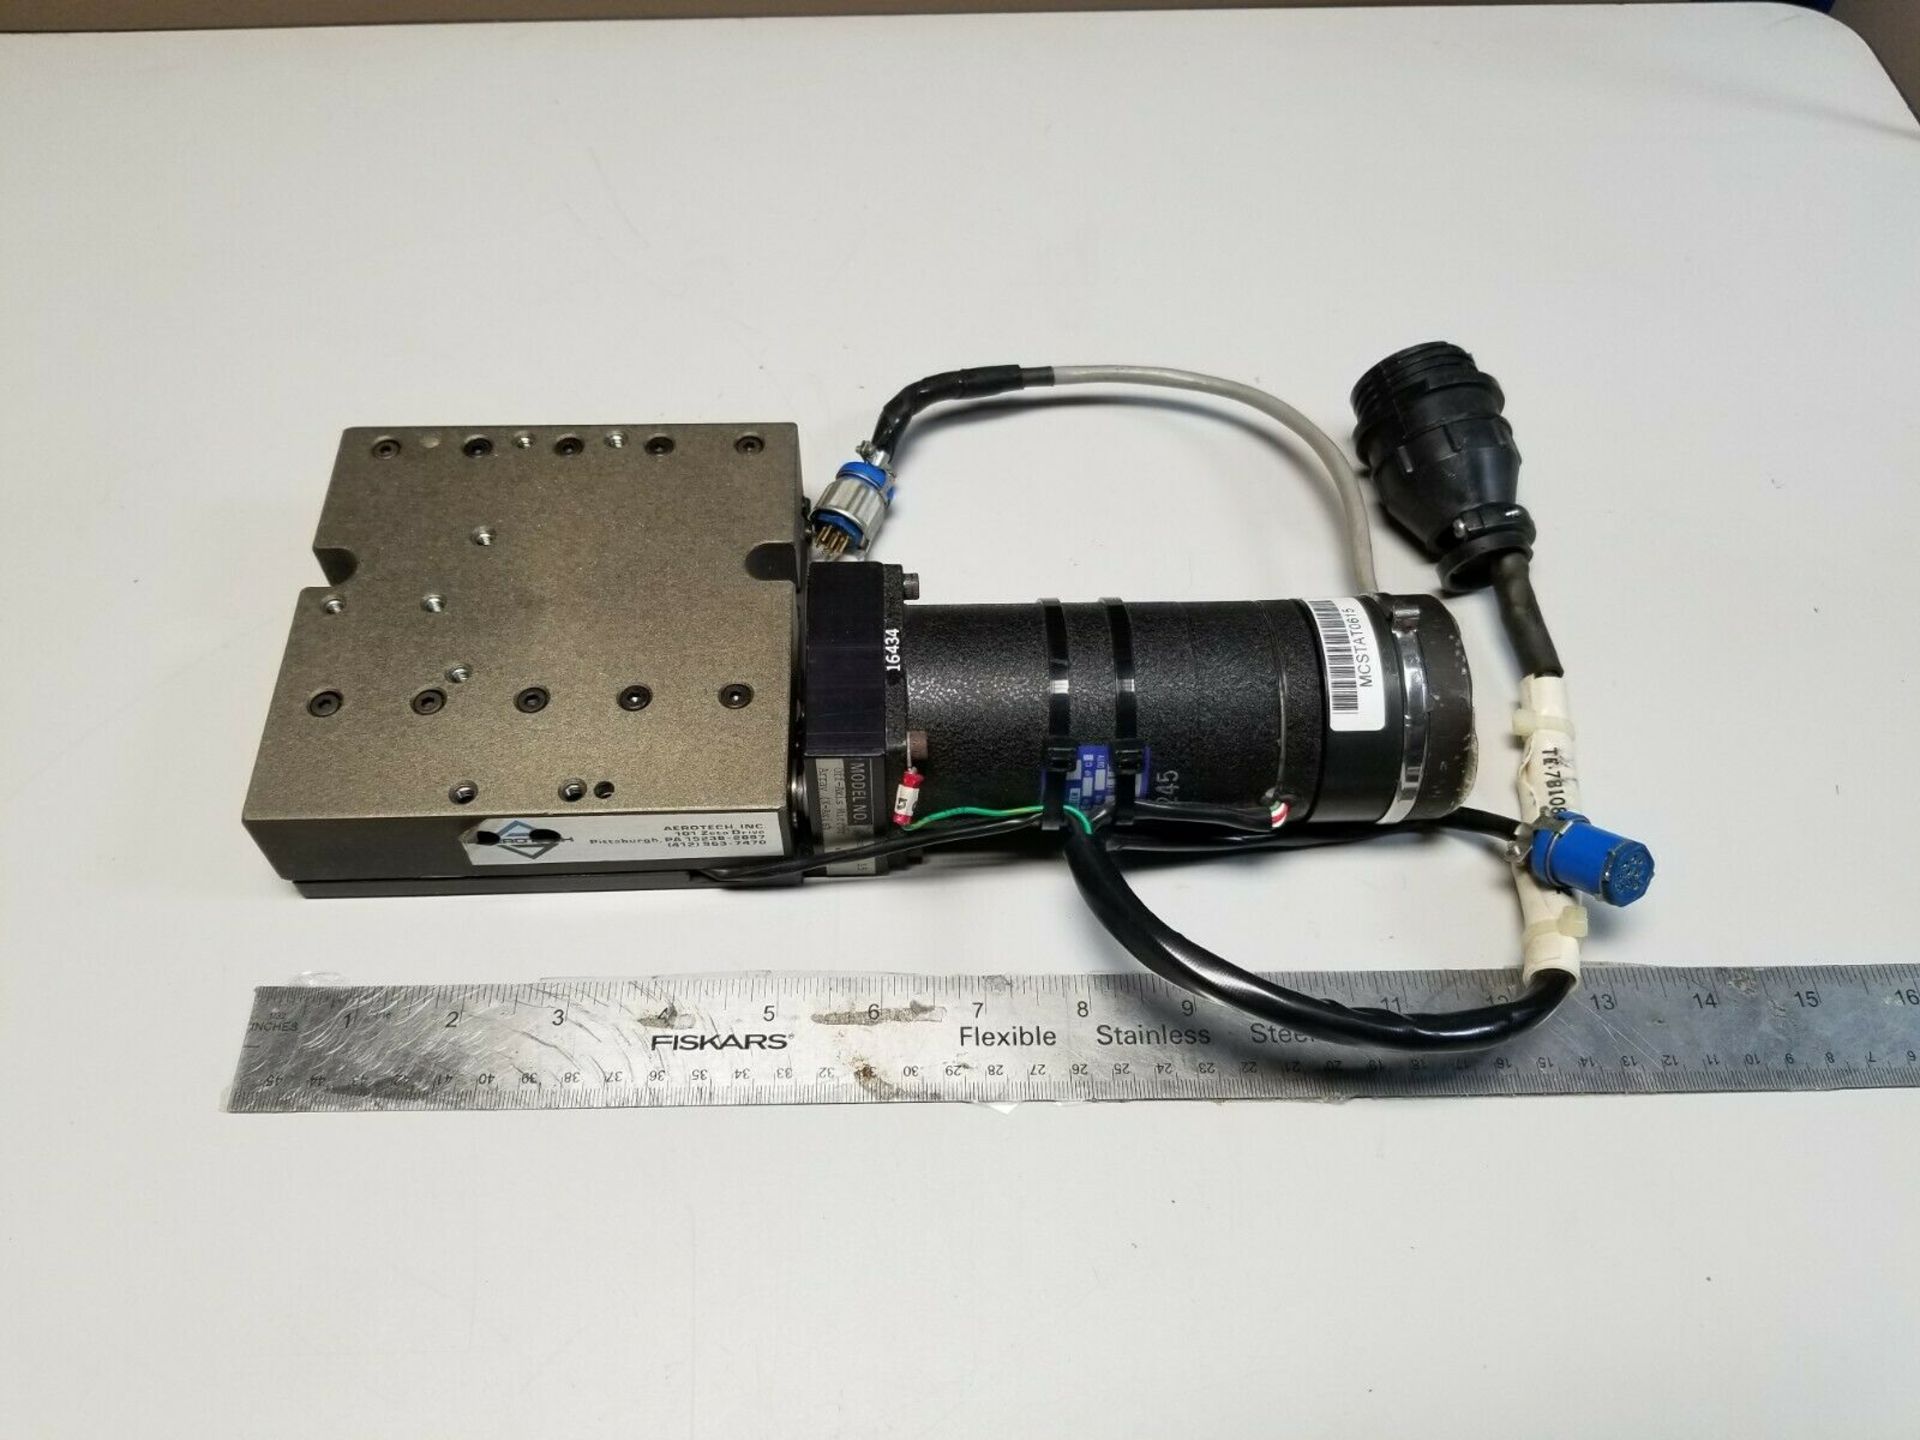 AEROTECH PRECISON LINEAR STAGE POSITIONER WITH STEPPER MOTOR & ENCODER